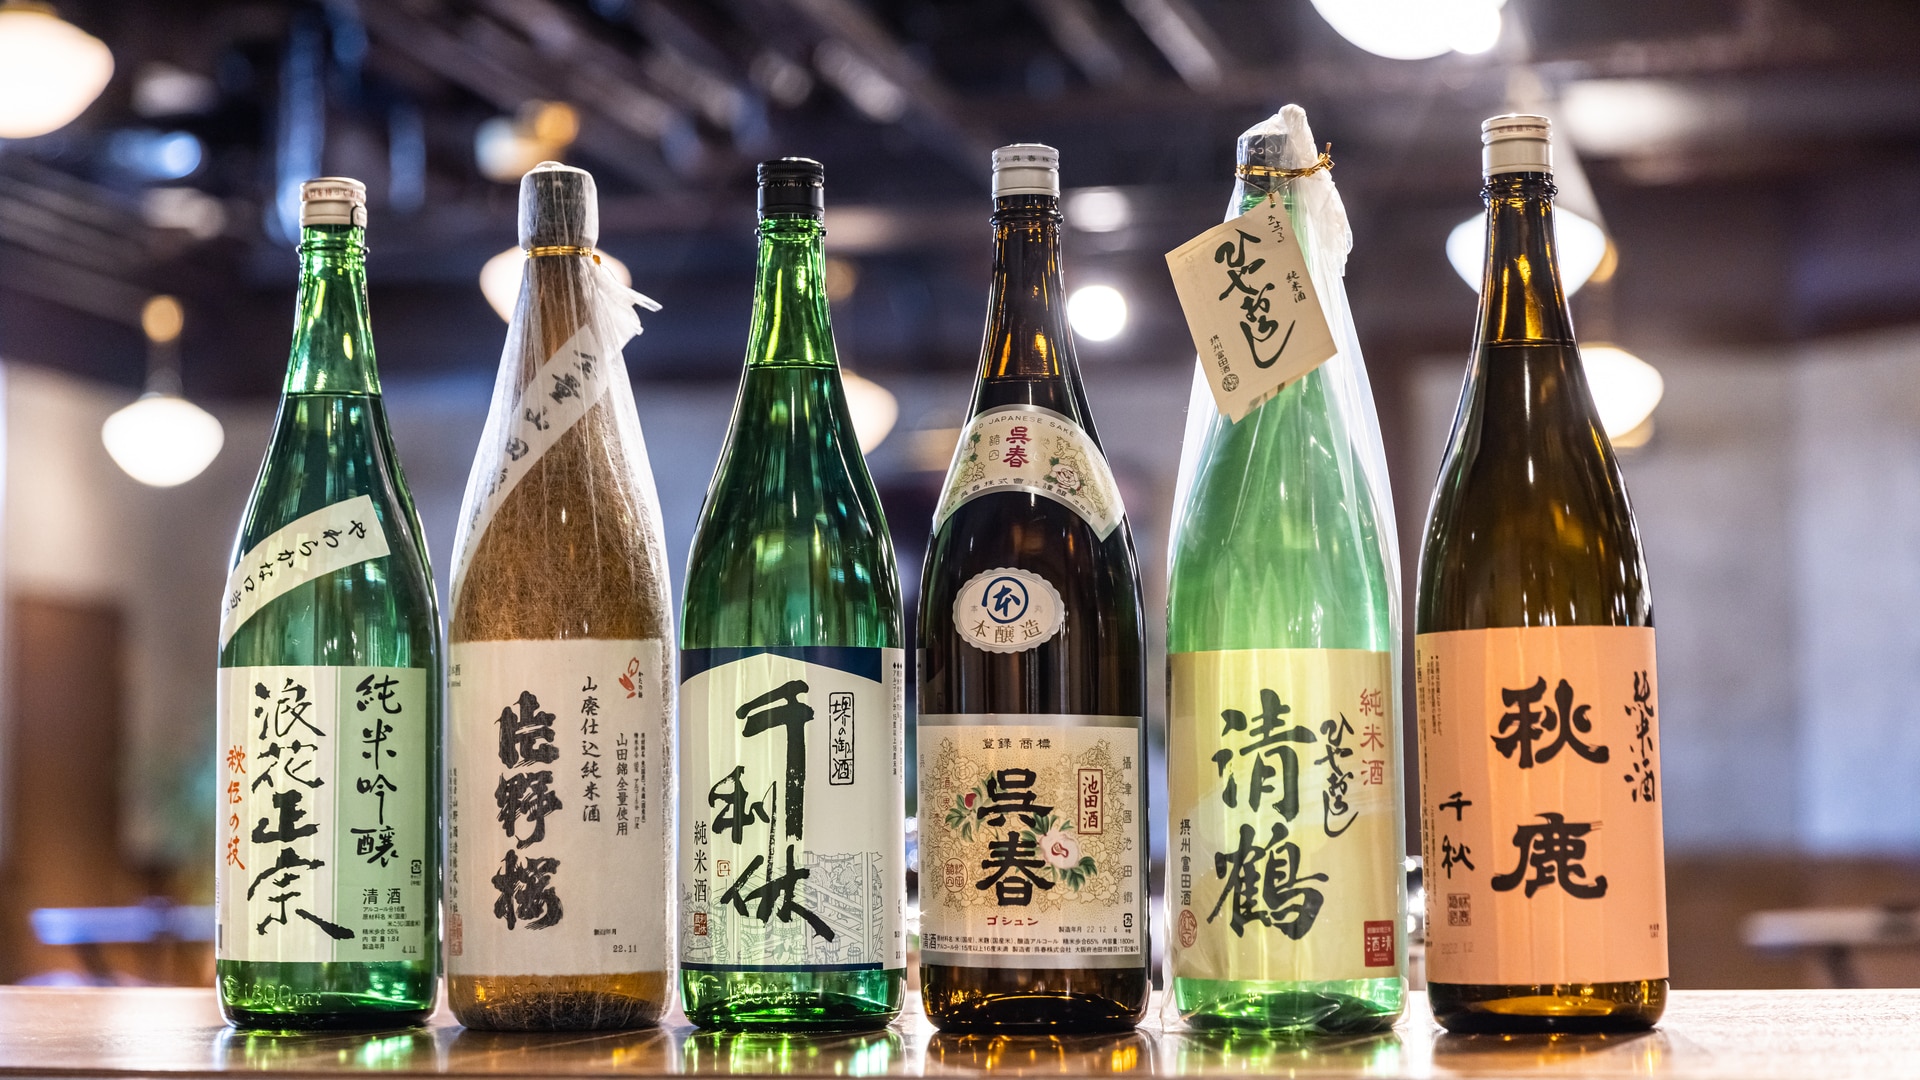 "Welcome Lounge" exclusively for guests 6 brands of sake from 6 breweries in Osaka Prefecture